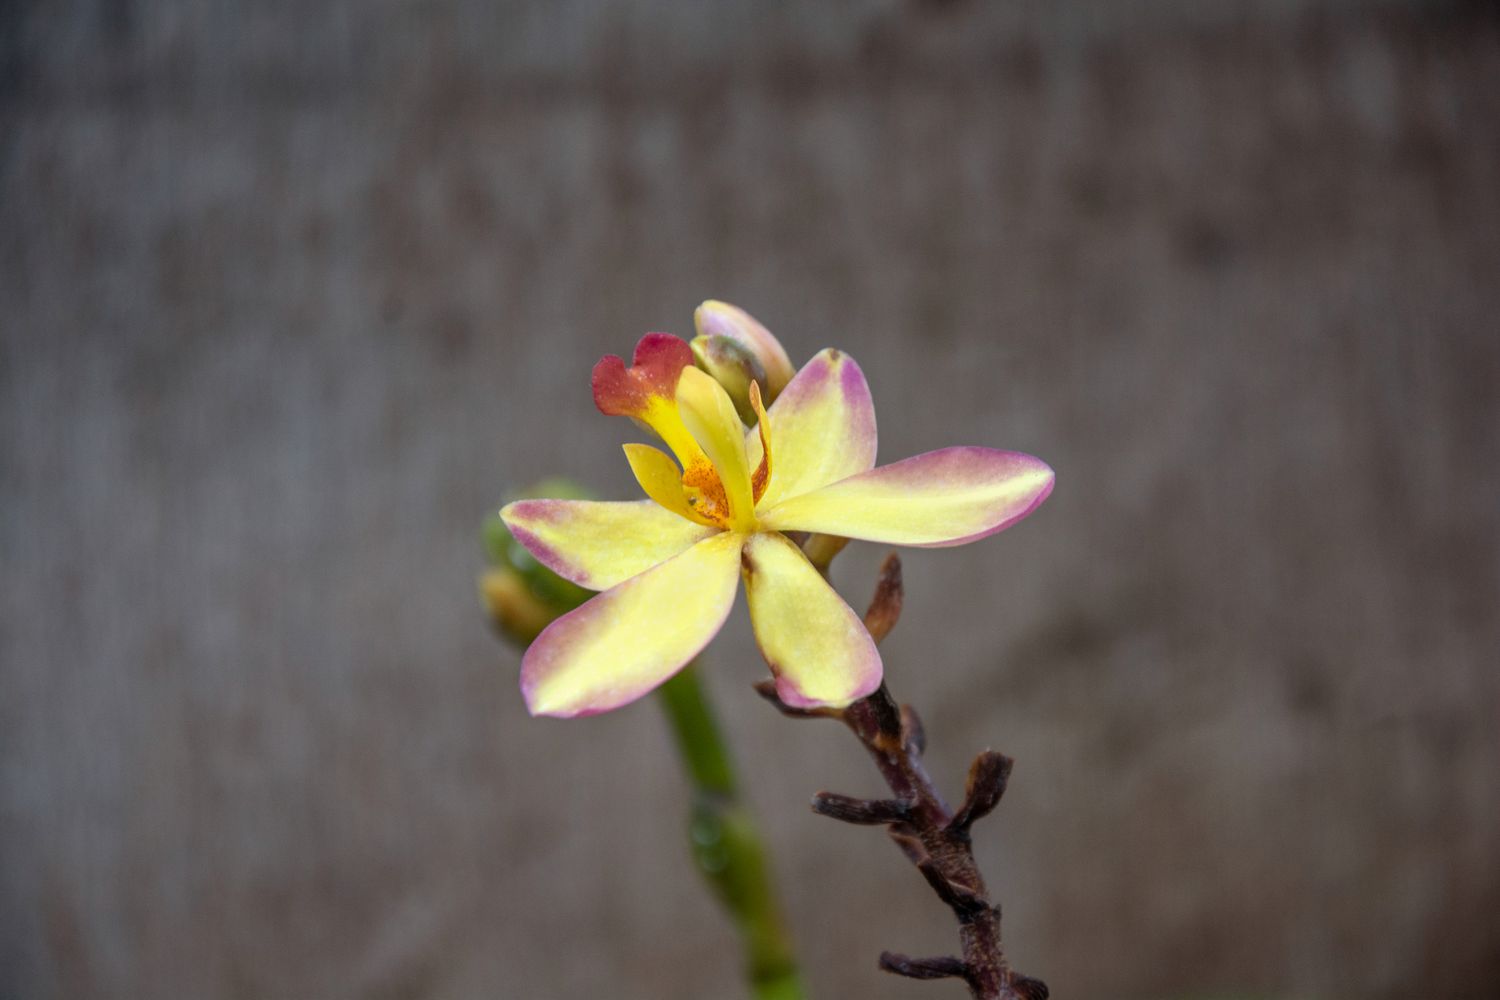 Spathoglottis orchid with yellow flower with pink tips on edge of stem closeup